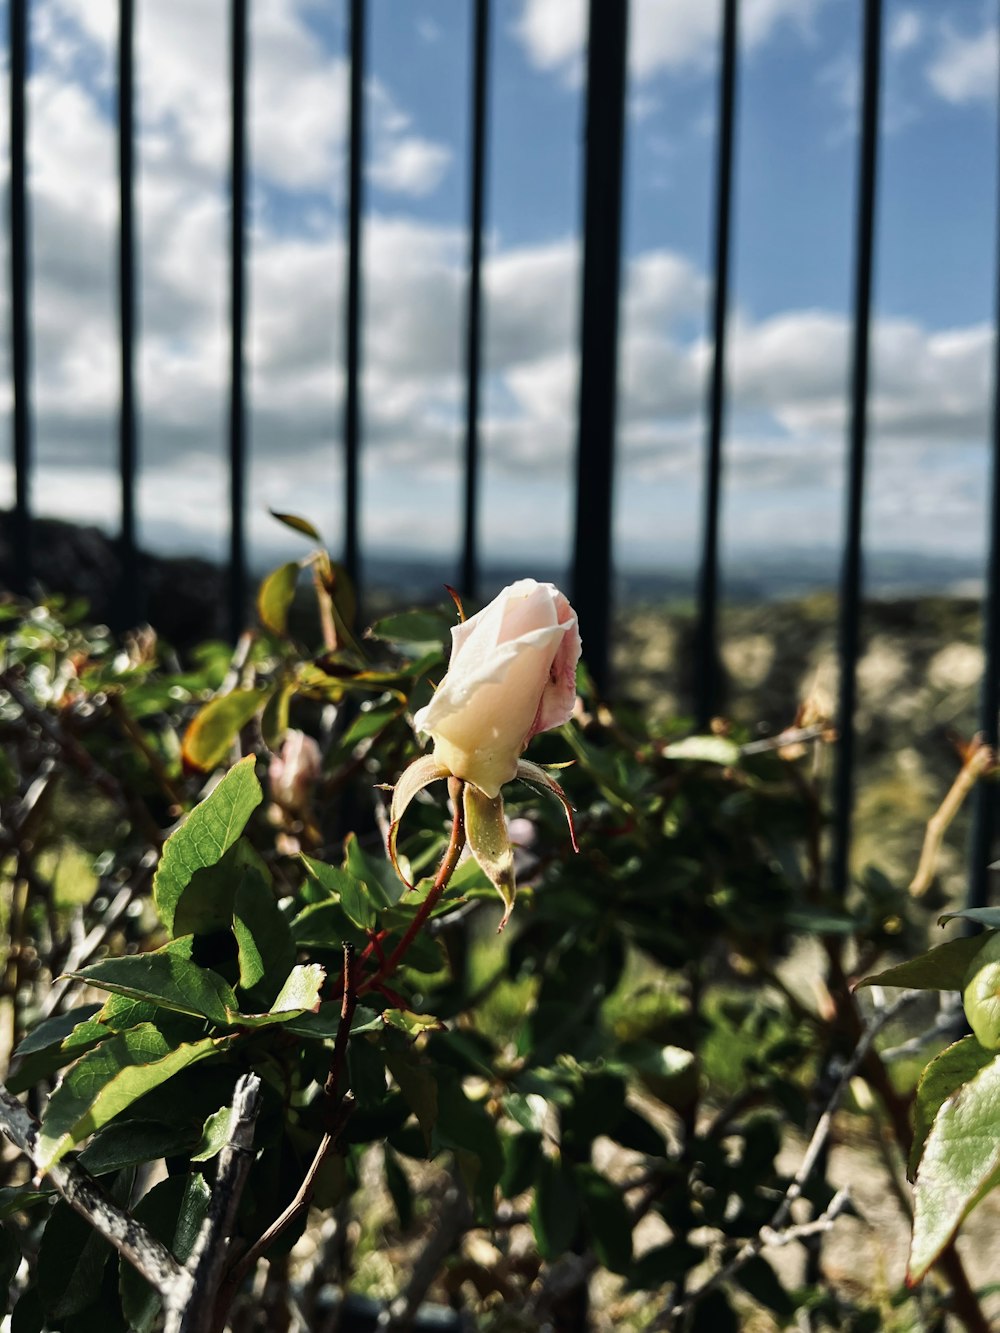 a single white rose in a fenced in area